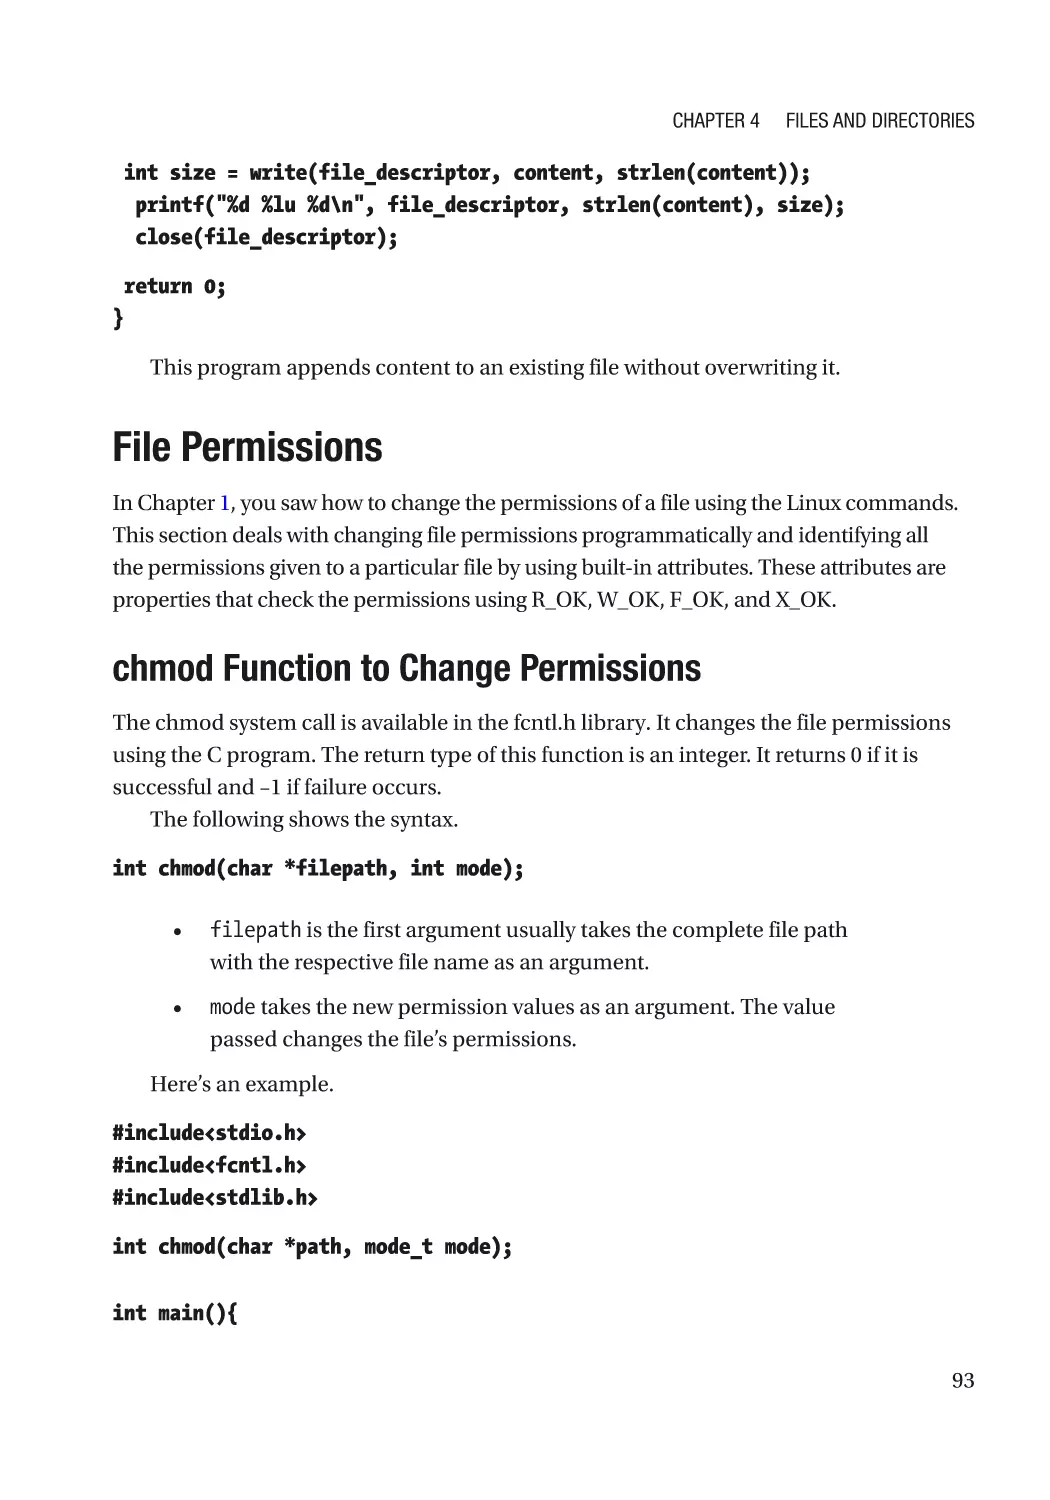 File Permissions
chmod Function to Change Permissions